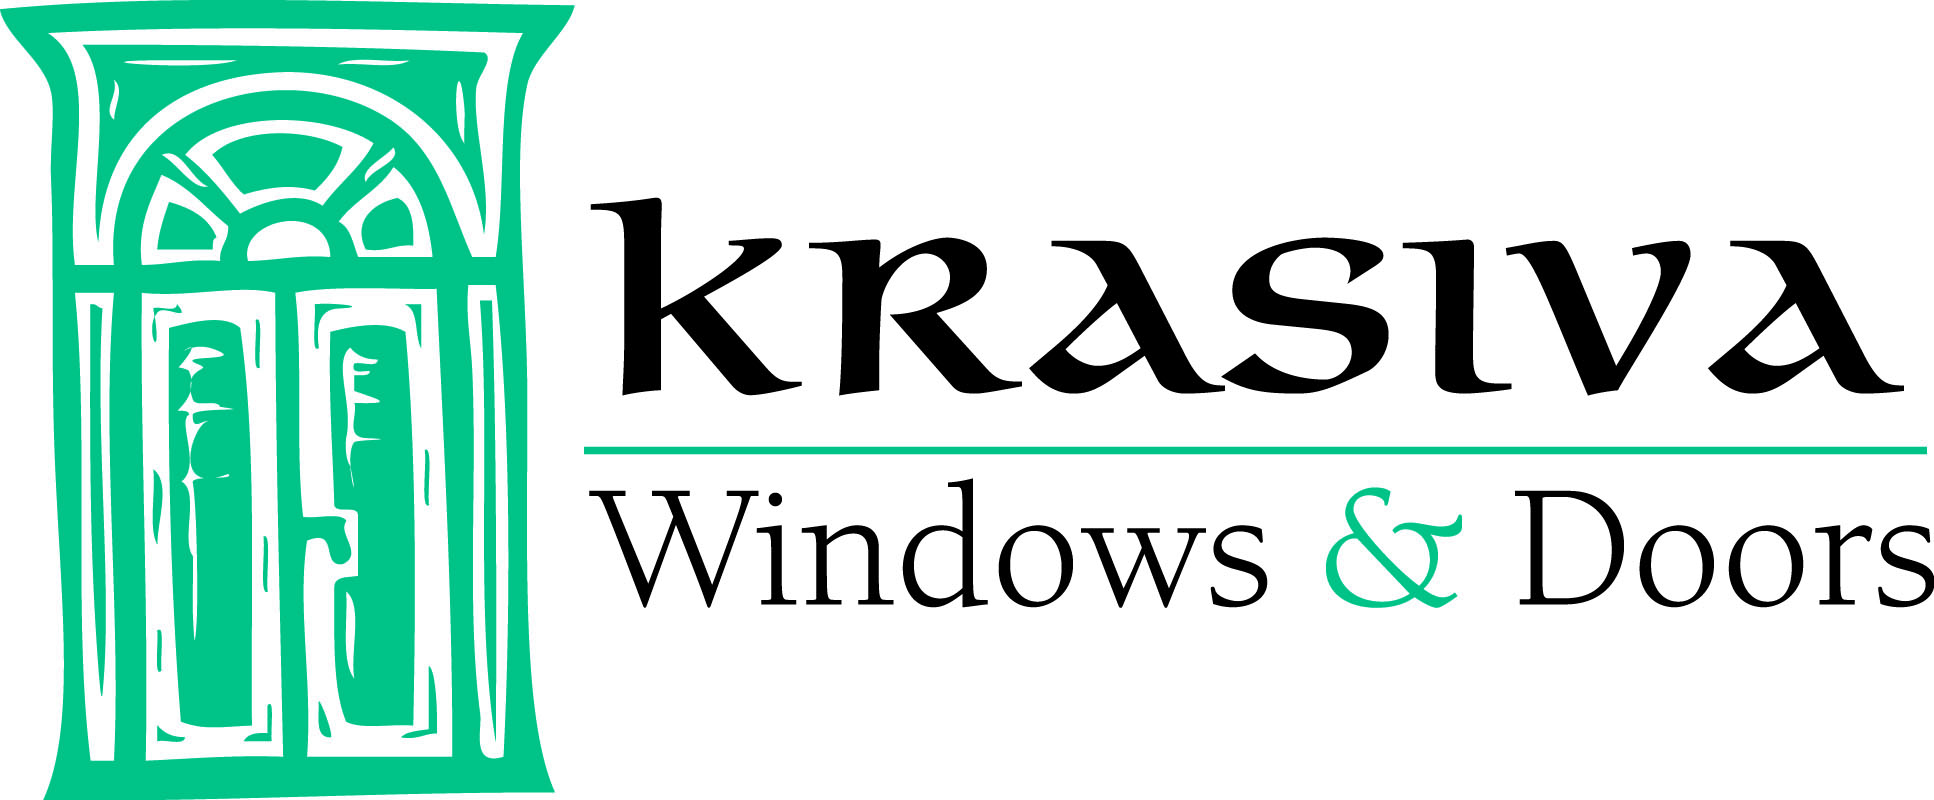 Krasiva Windows and Doors Maintains Its Position as The Go-To Vinyl Replacement Windows Provider